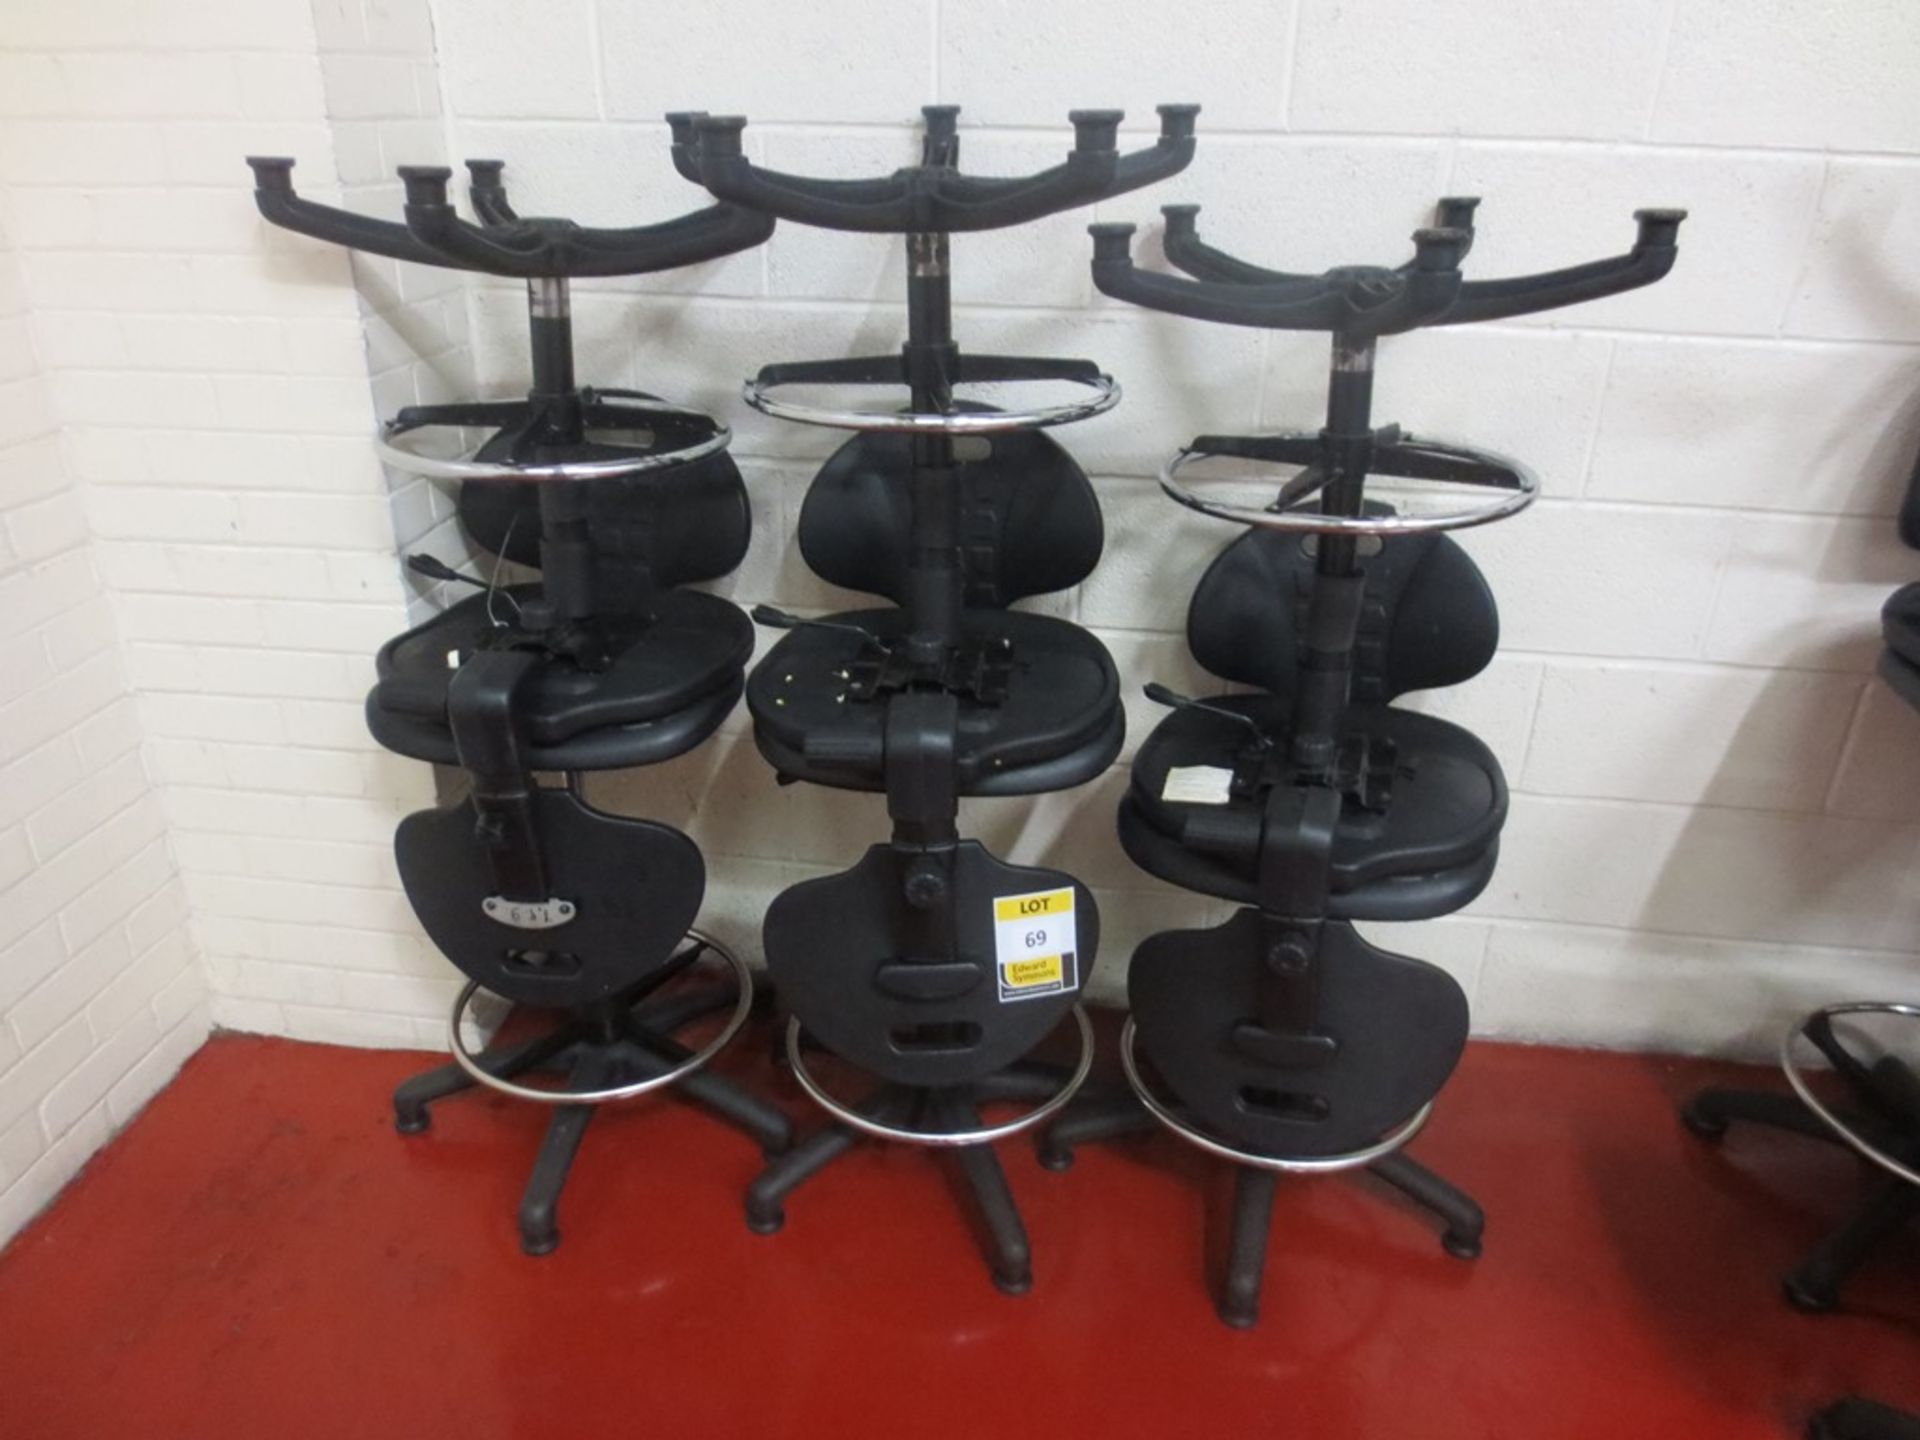 6 swiveleling rubber operators chairs with foot rest